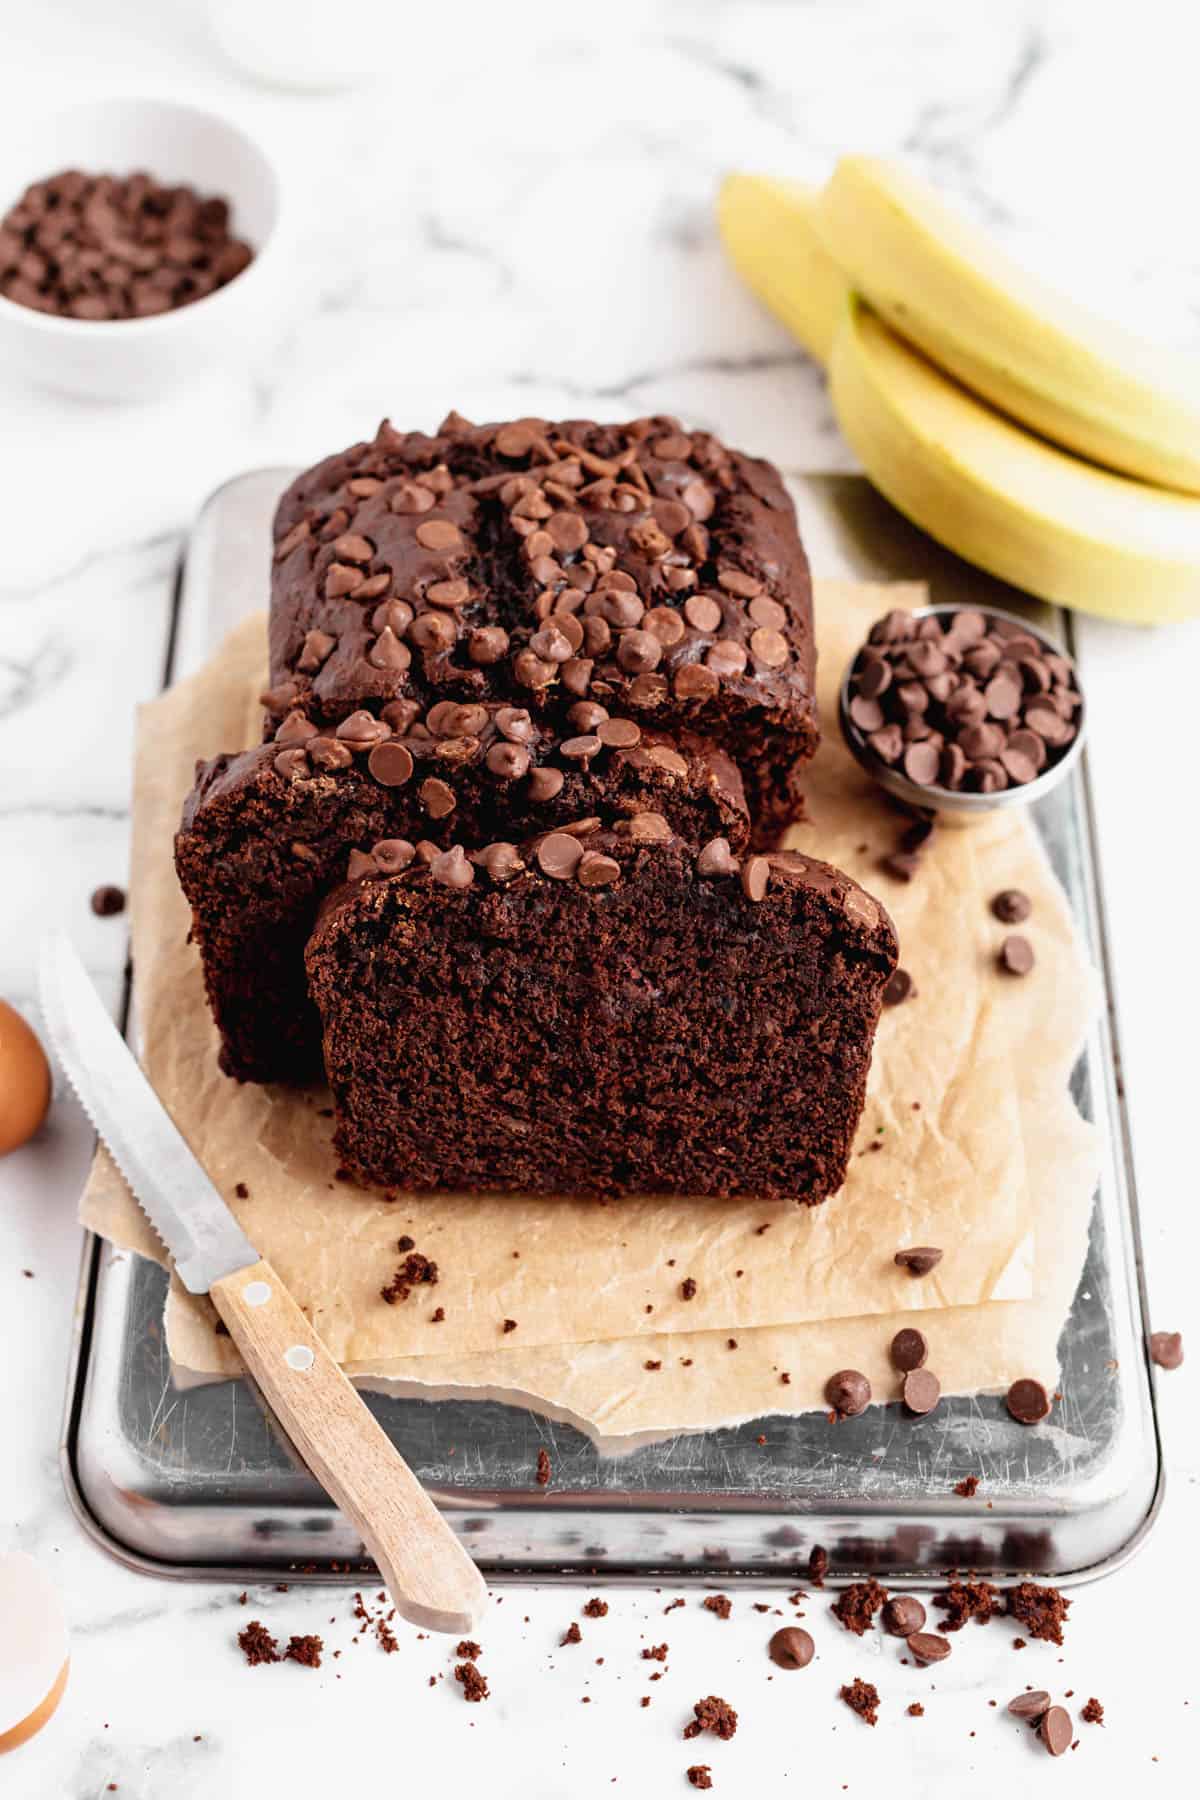 A chocolate banana bread loaf surrounded by chocolate chips, crumbs, a knife and bananas.